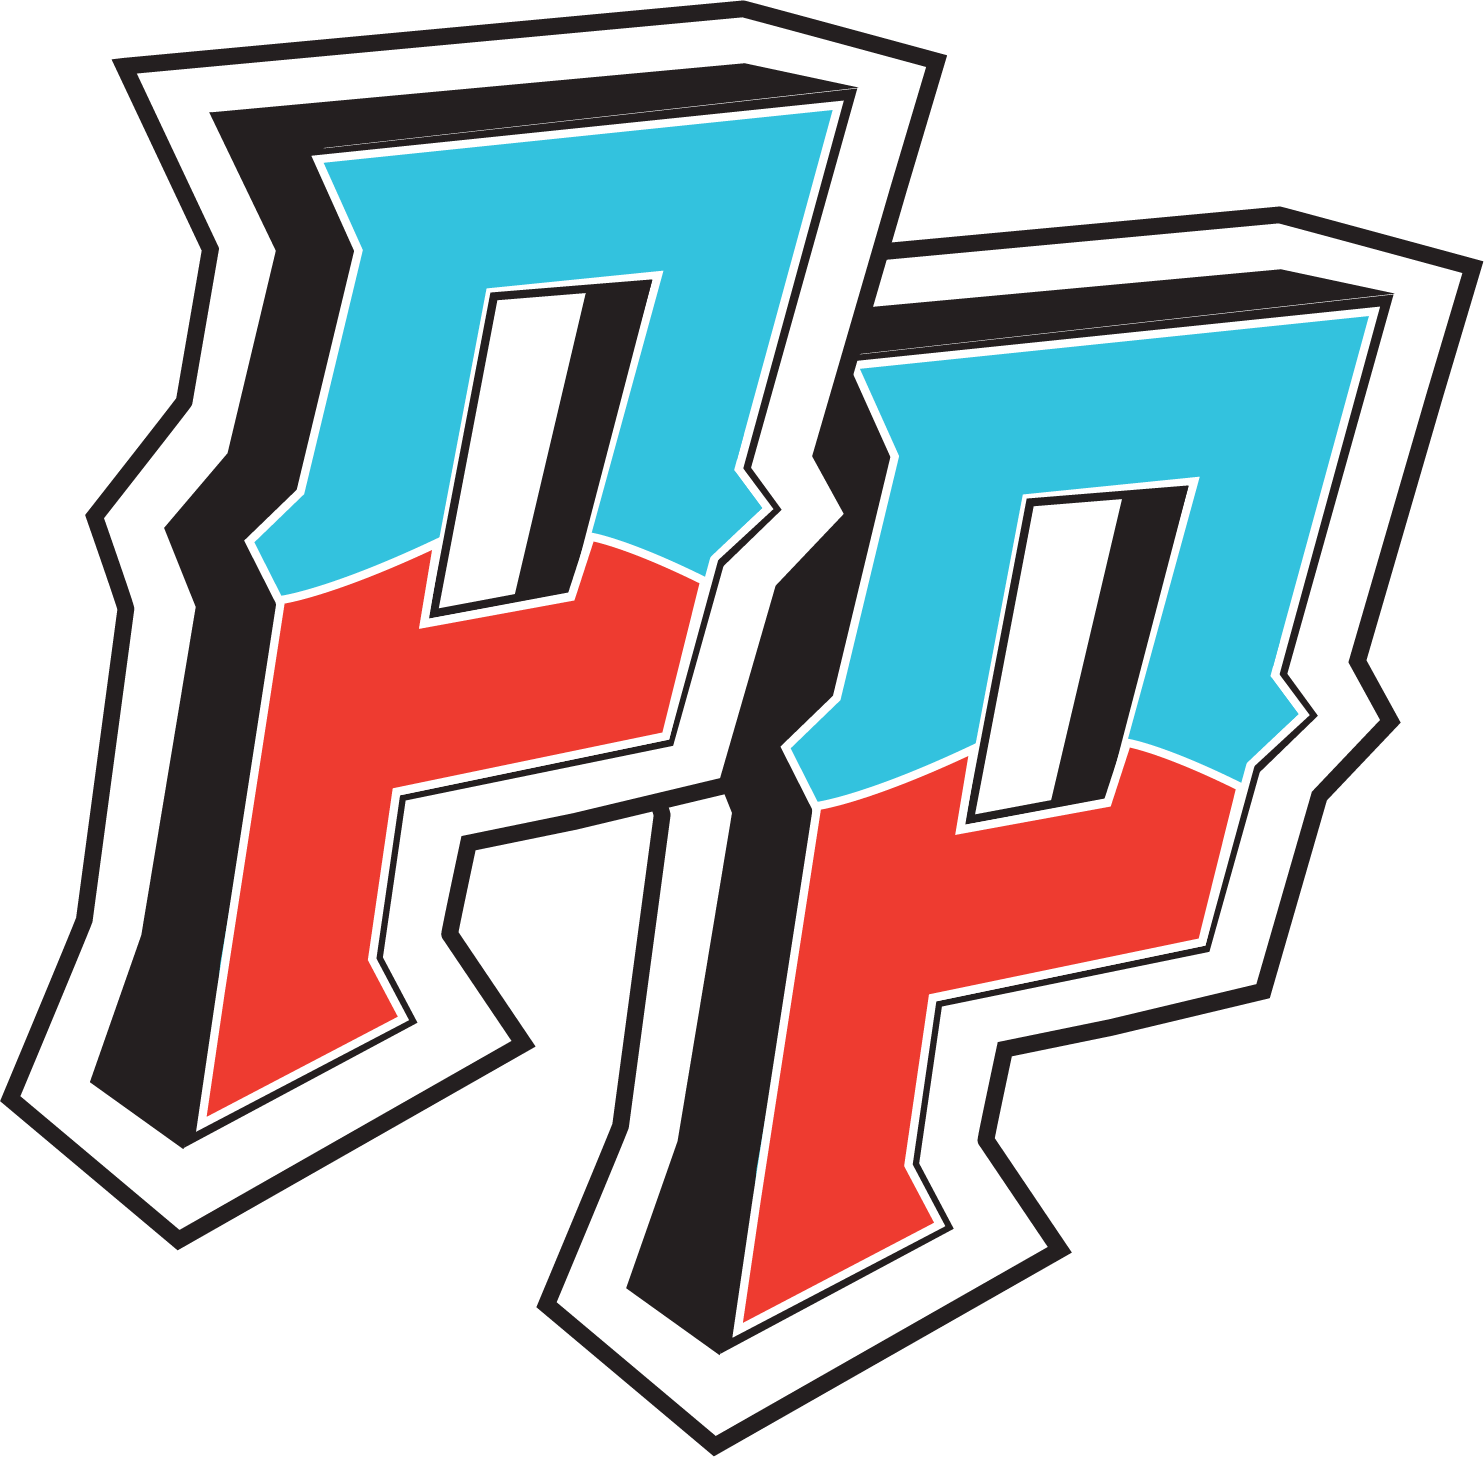 Player's Punch secondary logo